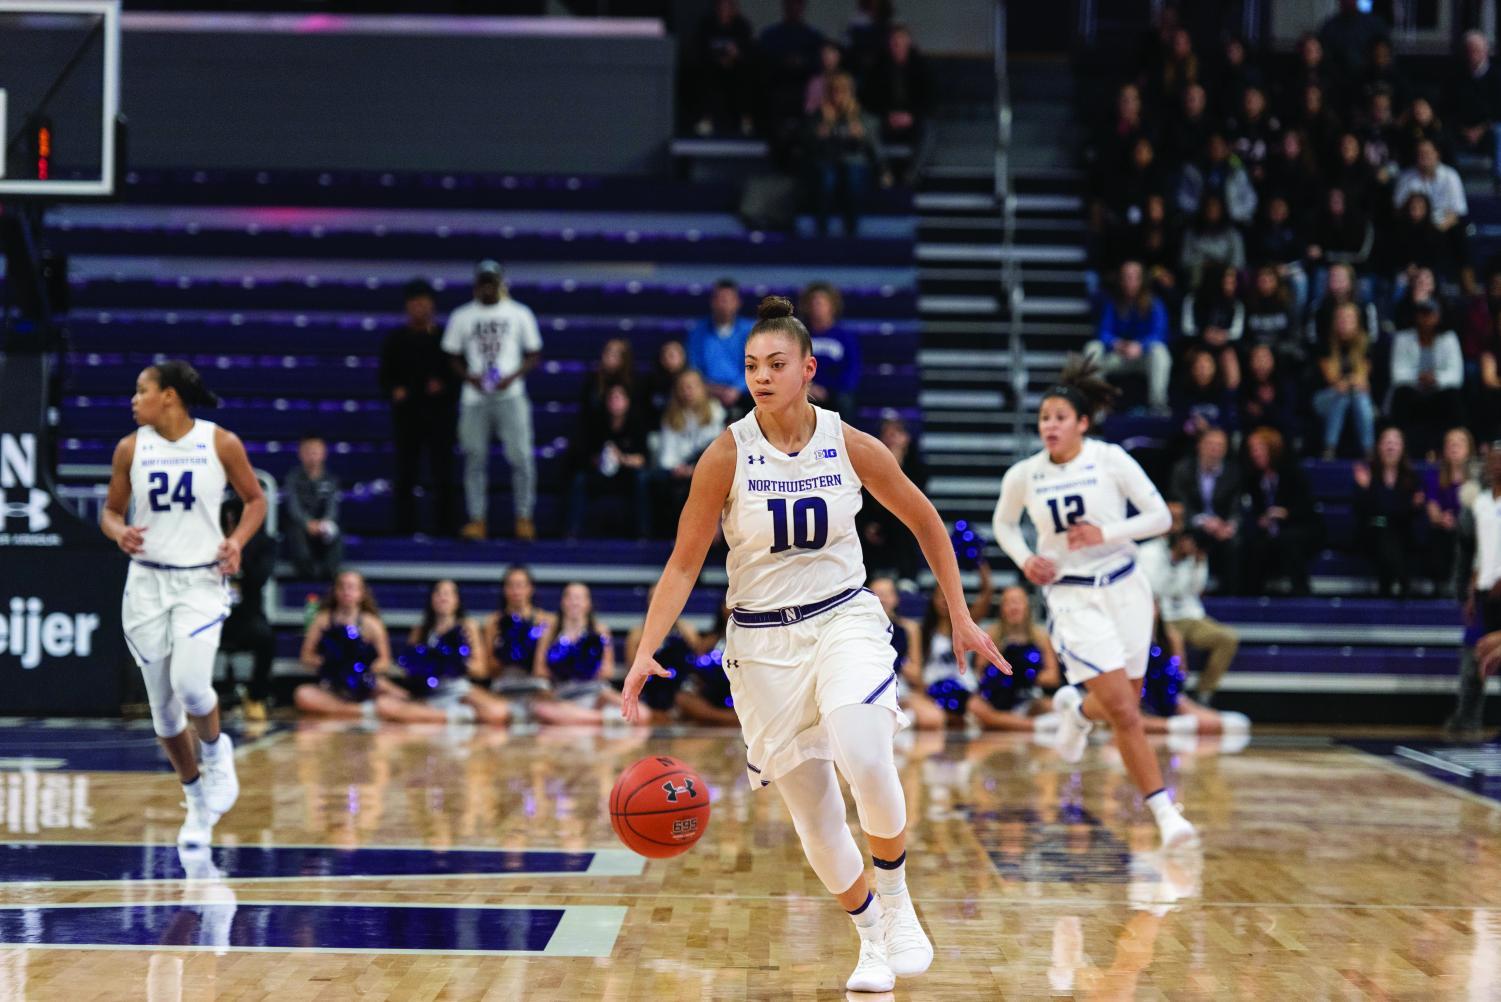 Lindsey+Pulliam+races+down+the+floor.+The+sophomore+guard+was+the+Wildcats%E2%80%99+leading+scorer+in+the+Duel+in+the+Desert.+